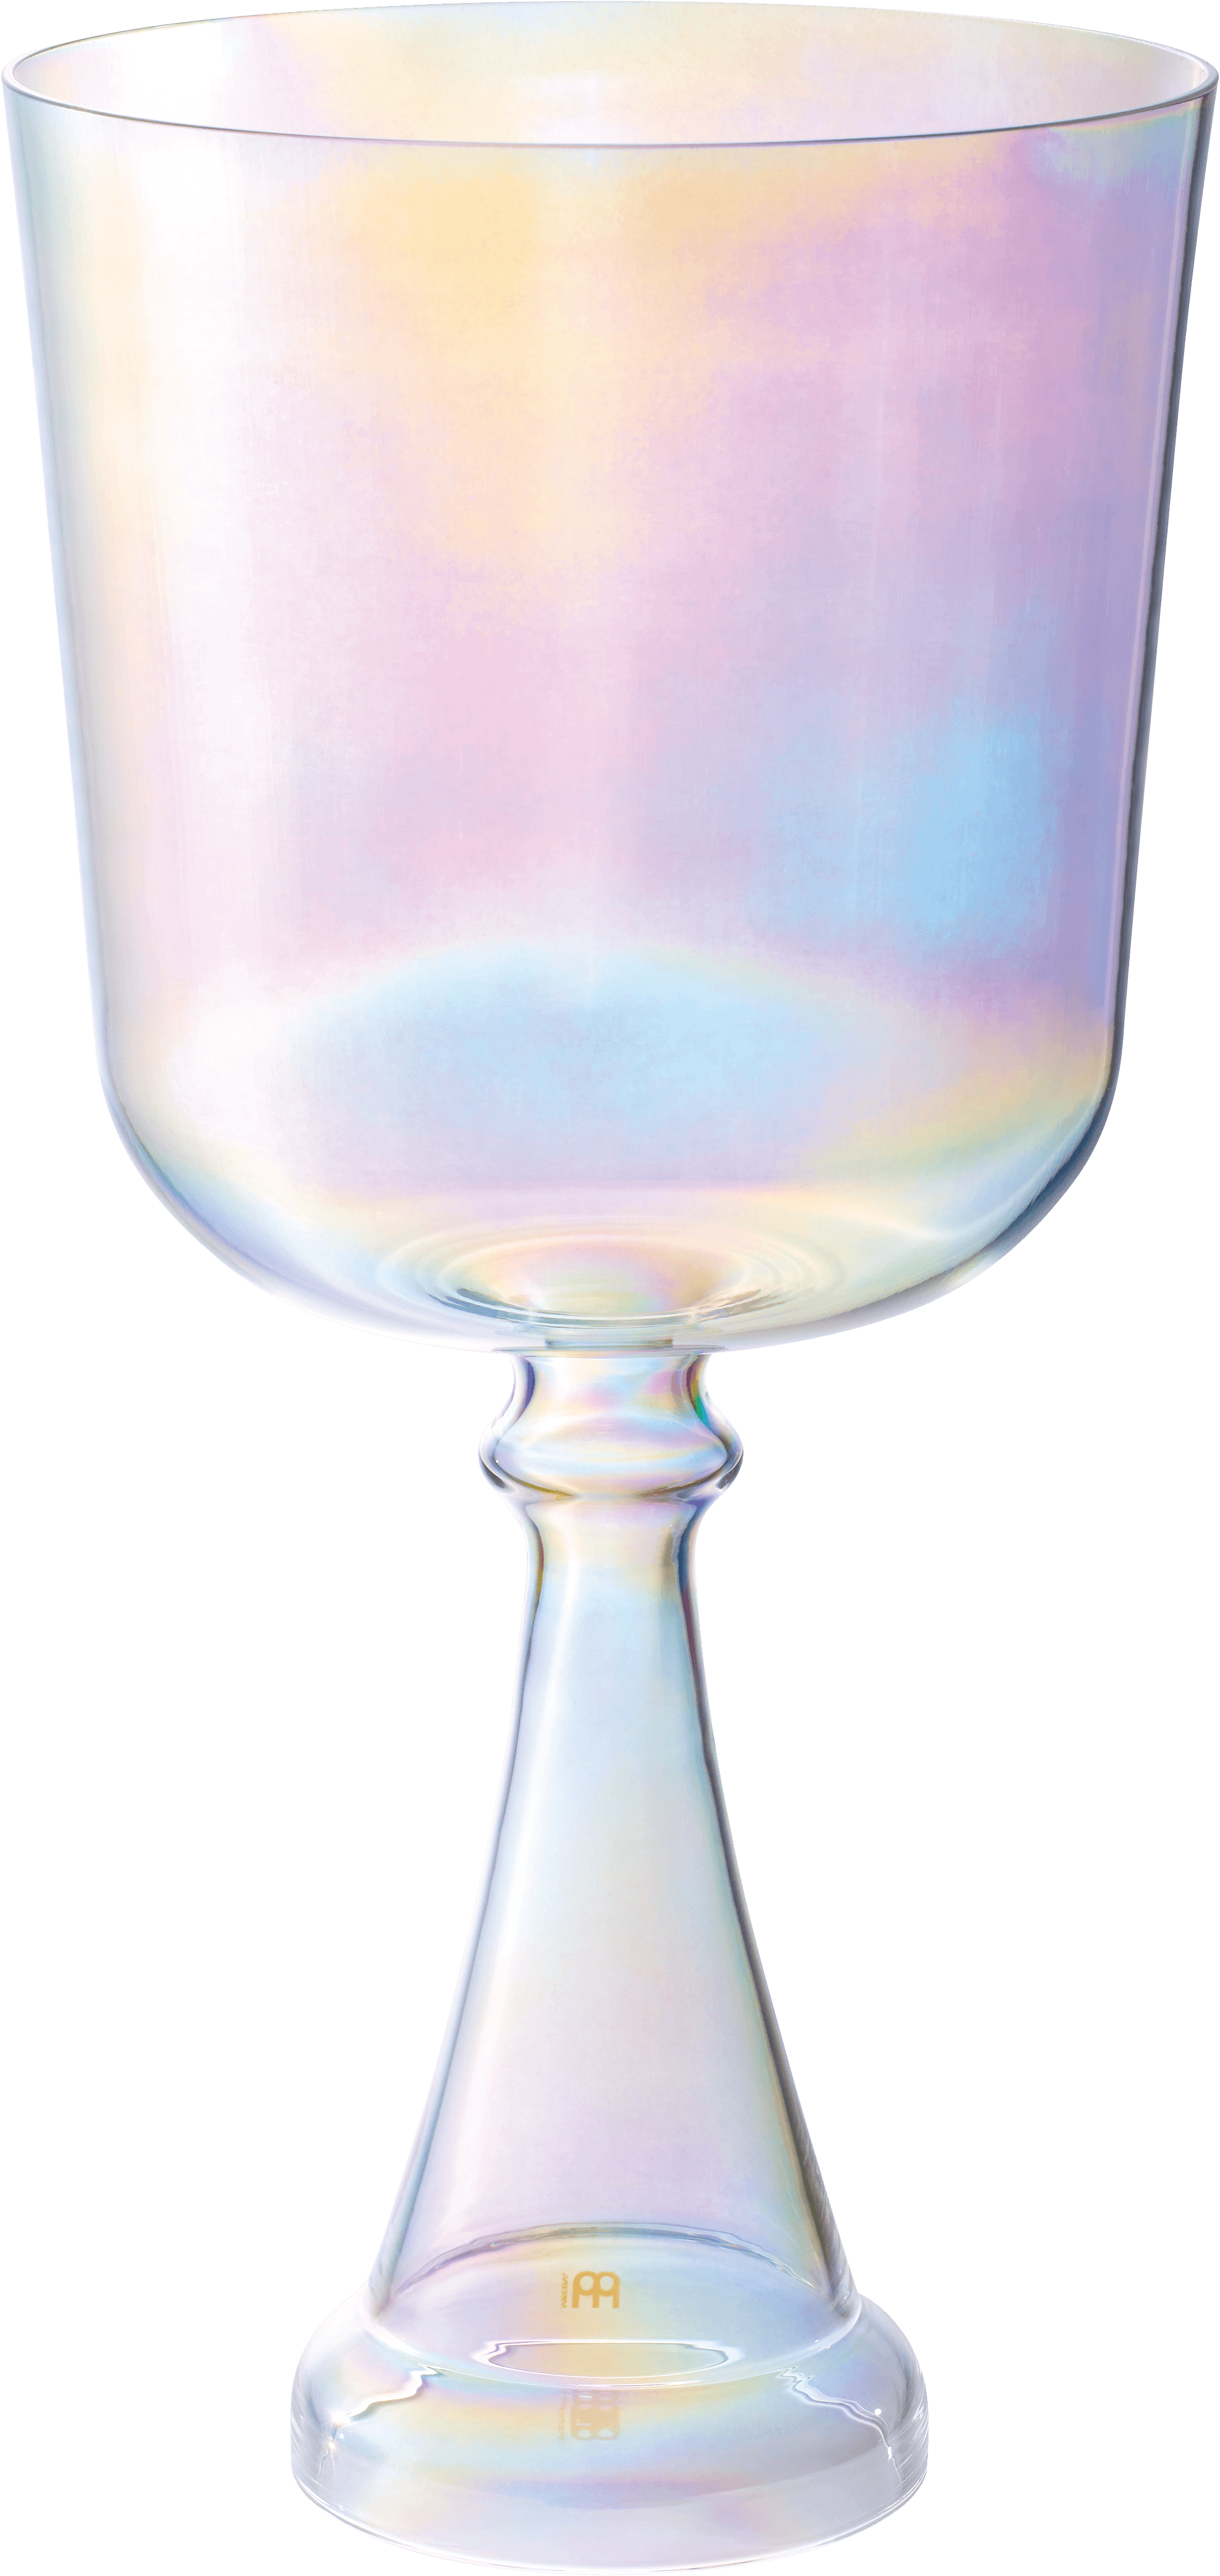 246.94 Hz Crystal Singing Chalice 7" Note B3 - Crown Chakra - Crystal Singing Chalices